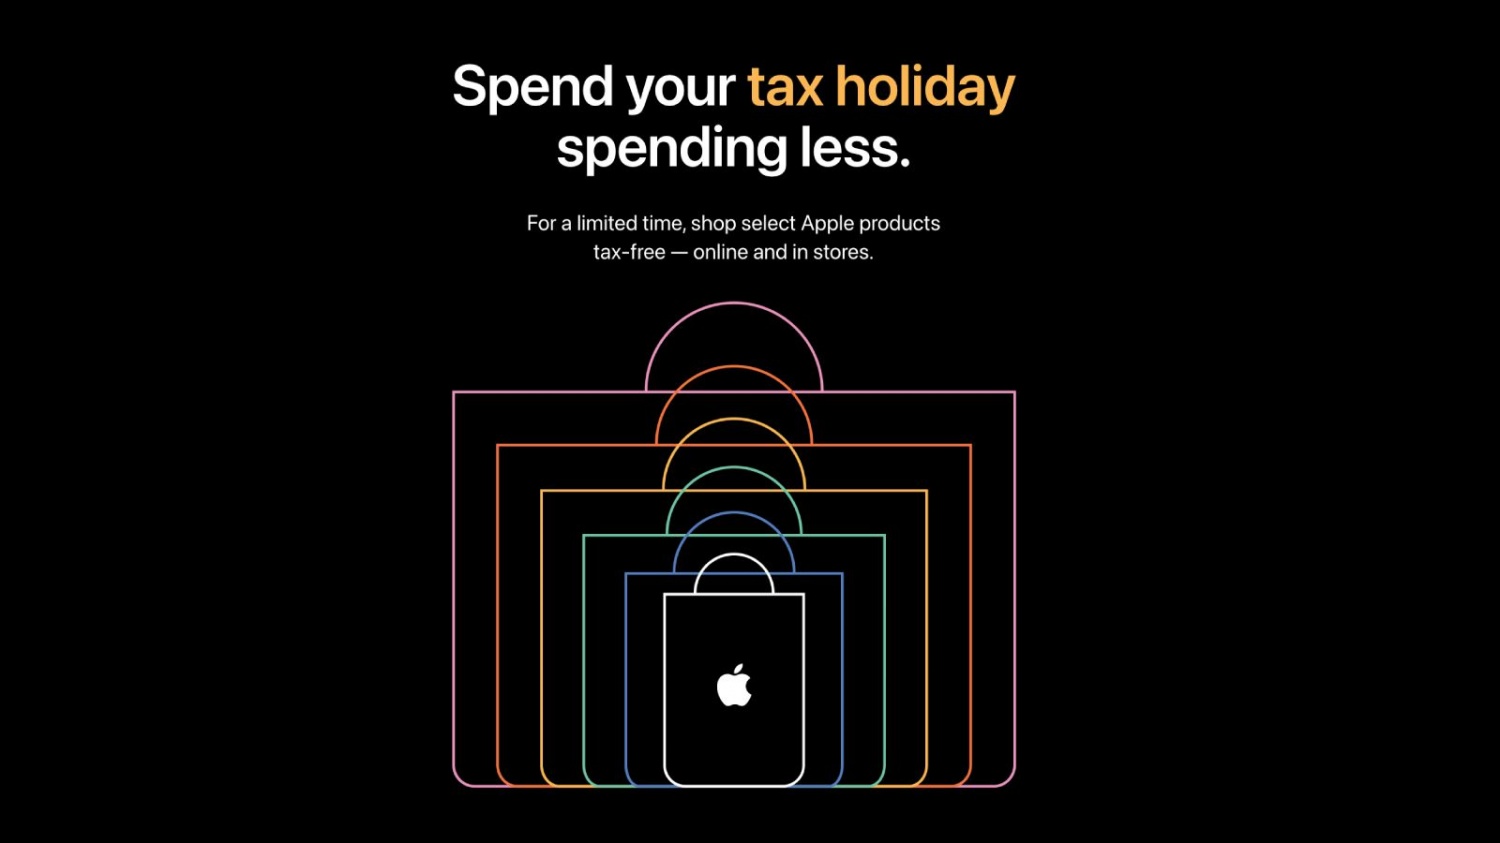 Apple Products to Get Cheaper During US Sales Tax Holidays in Some States